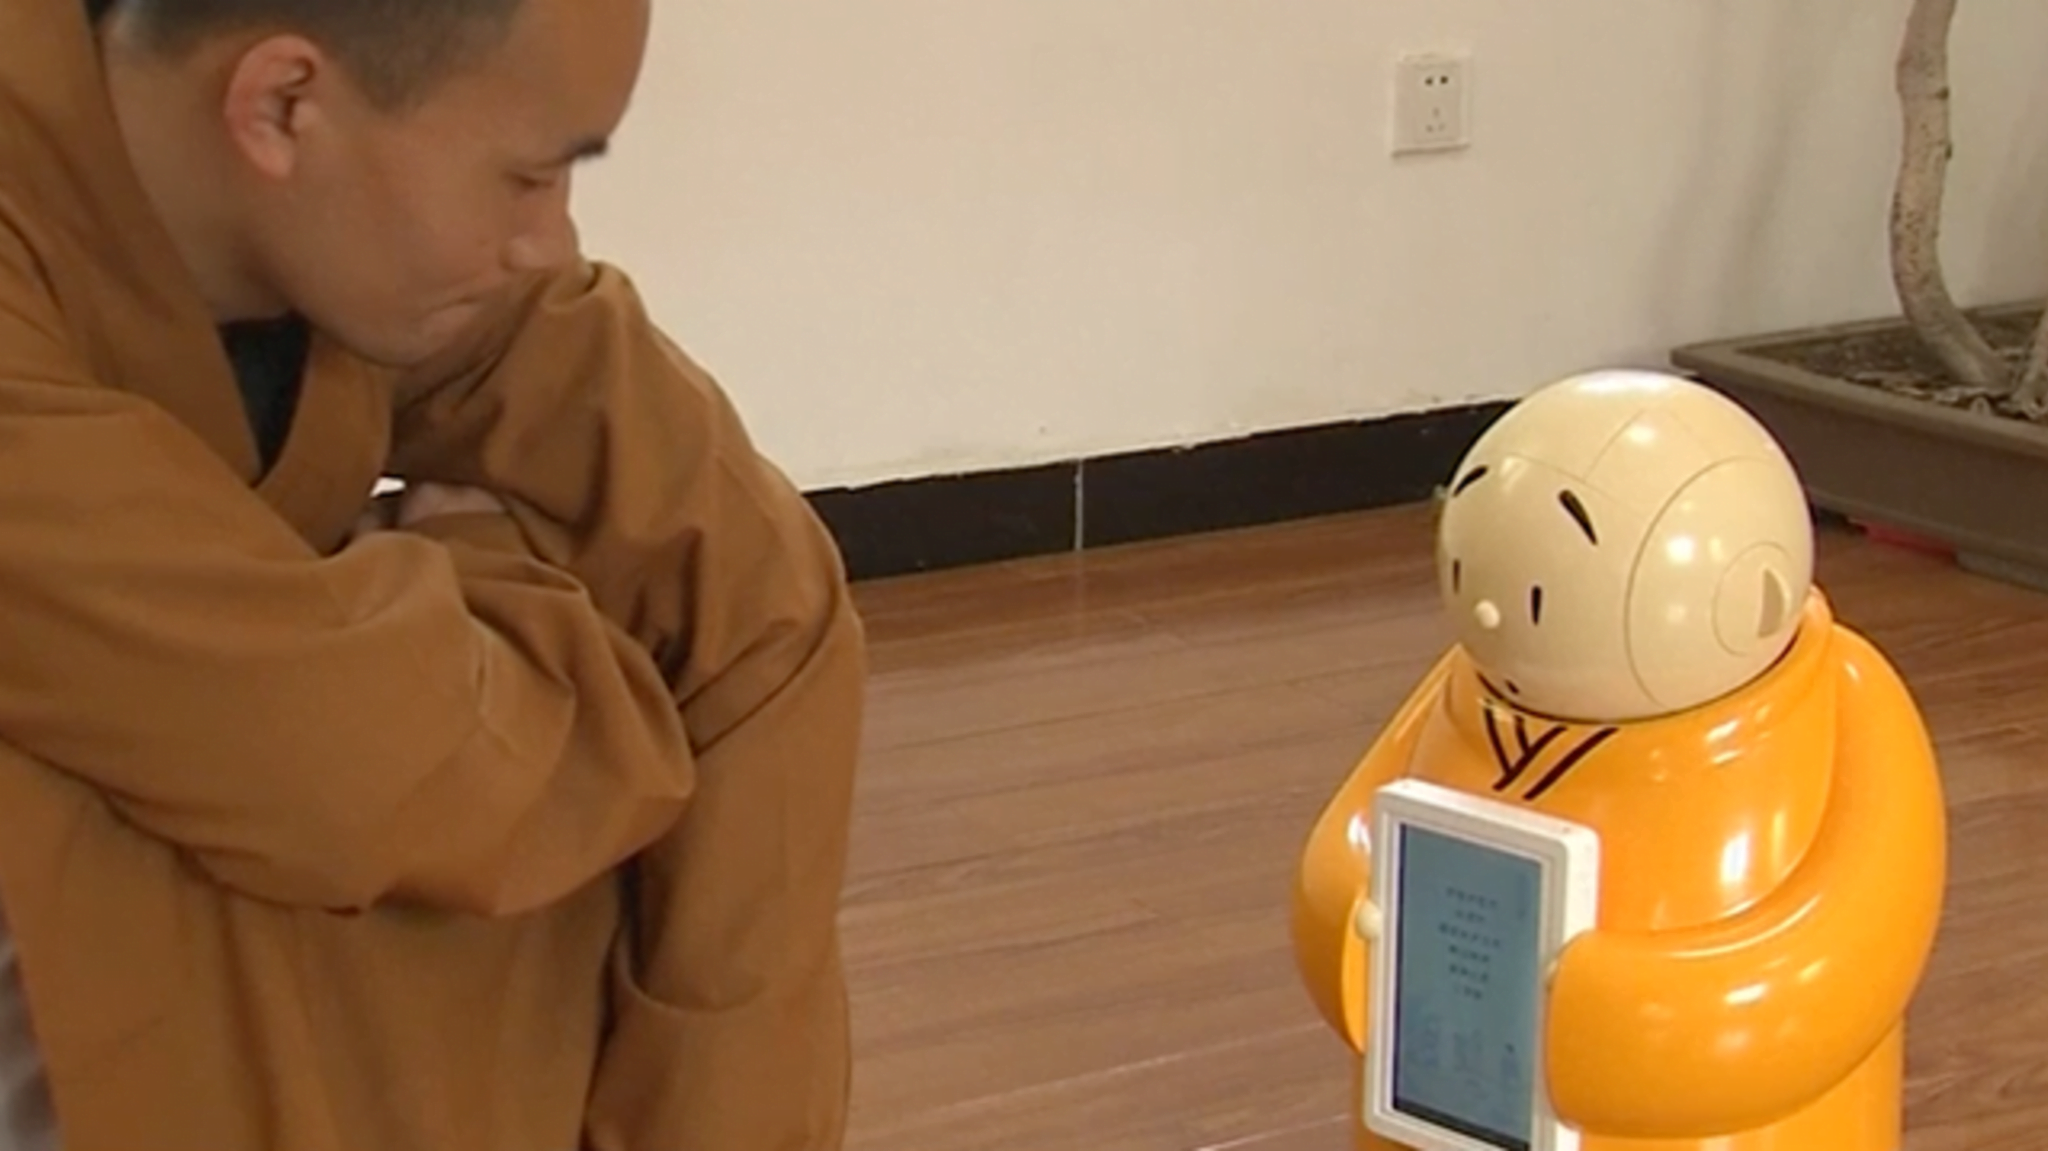 a monk and robot book